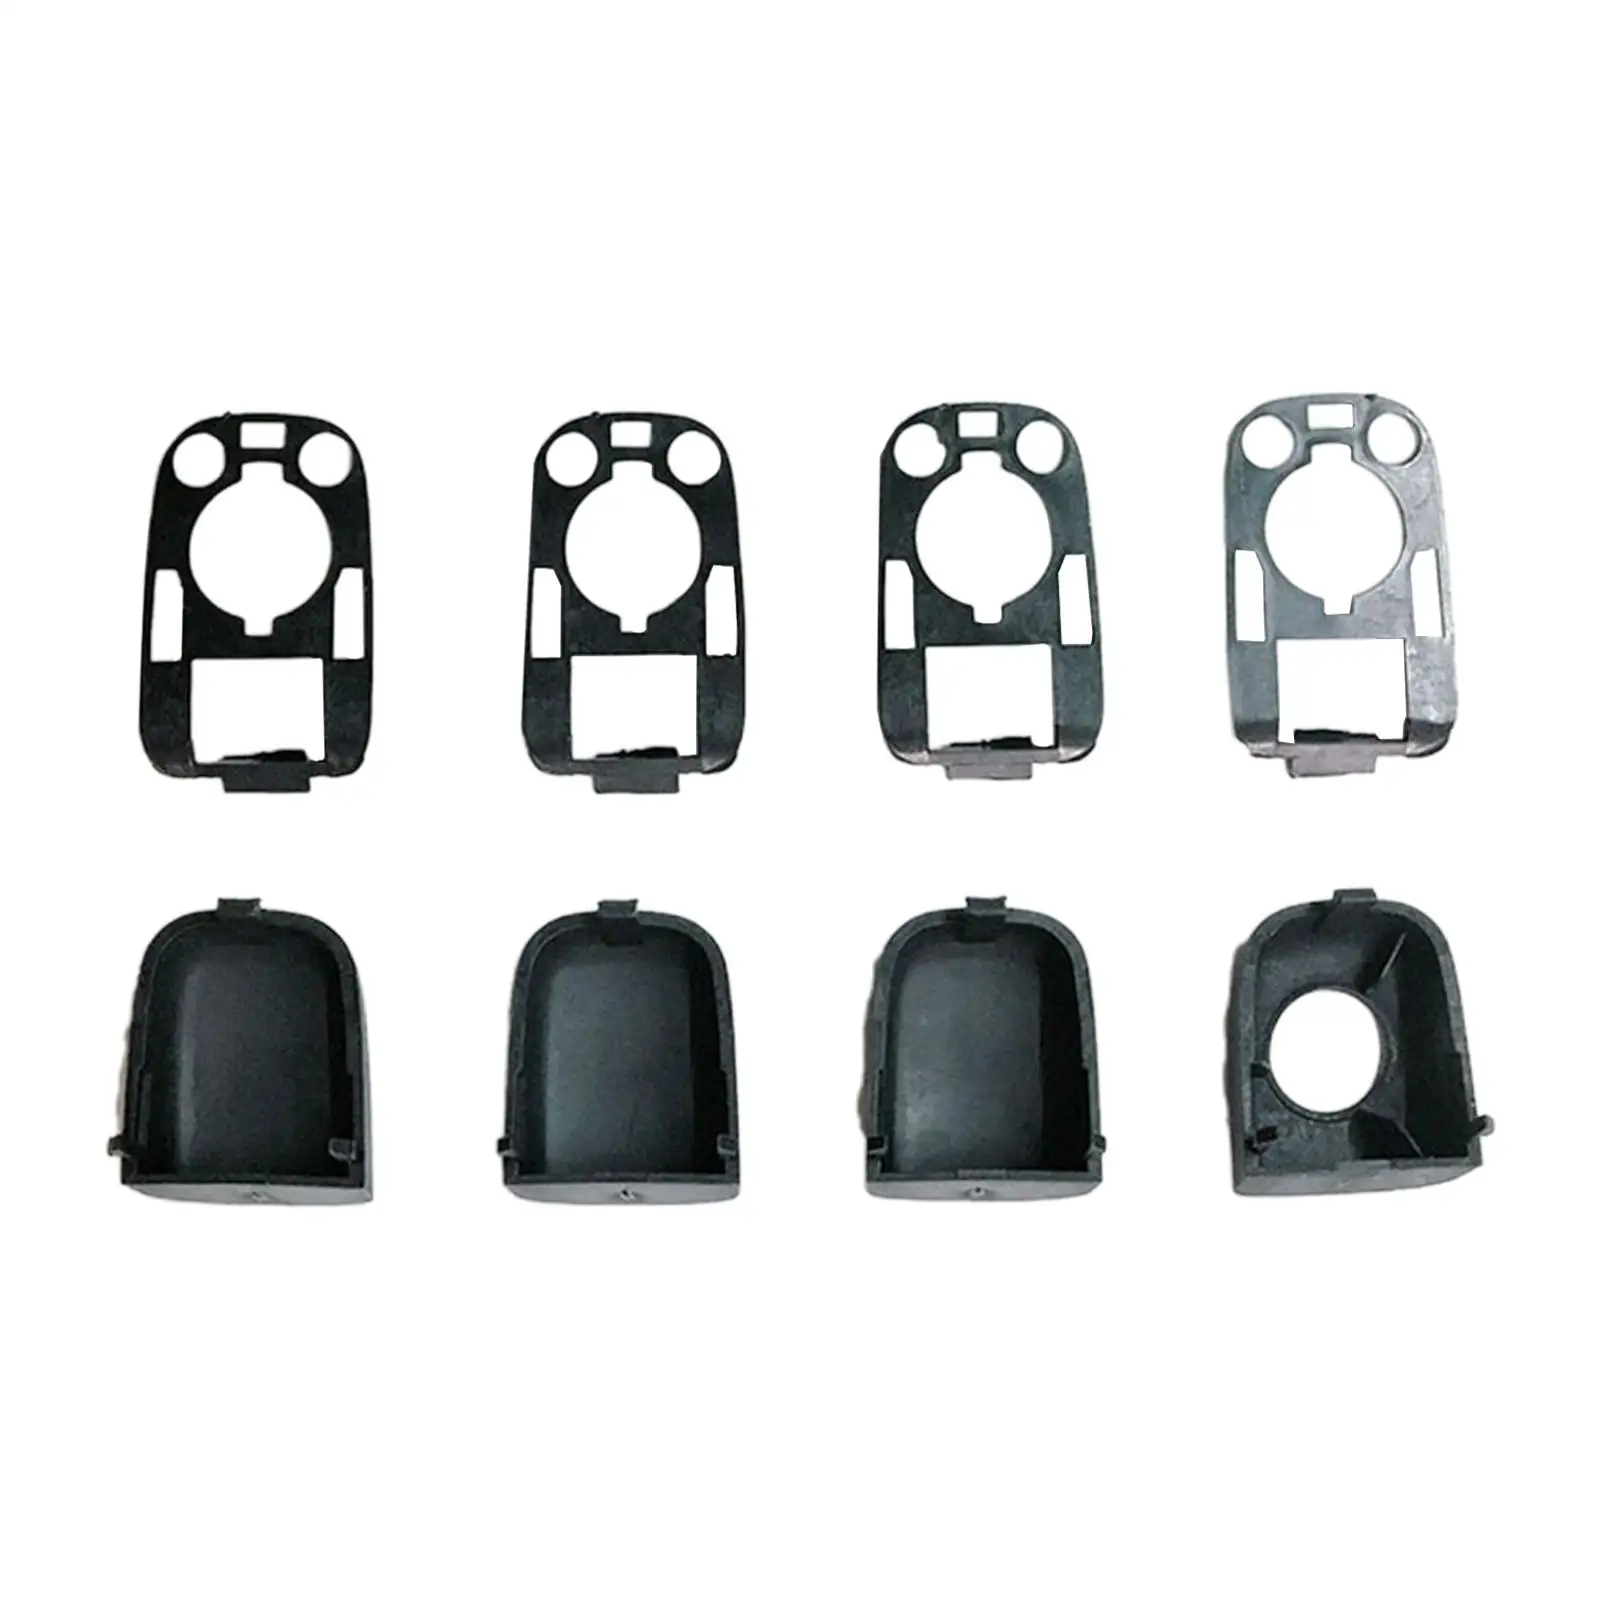 4x Door  End Cap Set Direct Replaces Left and Right with Seals for  307 Car Accessories Easy to Install